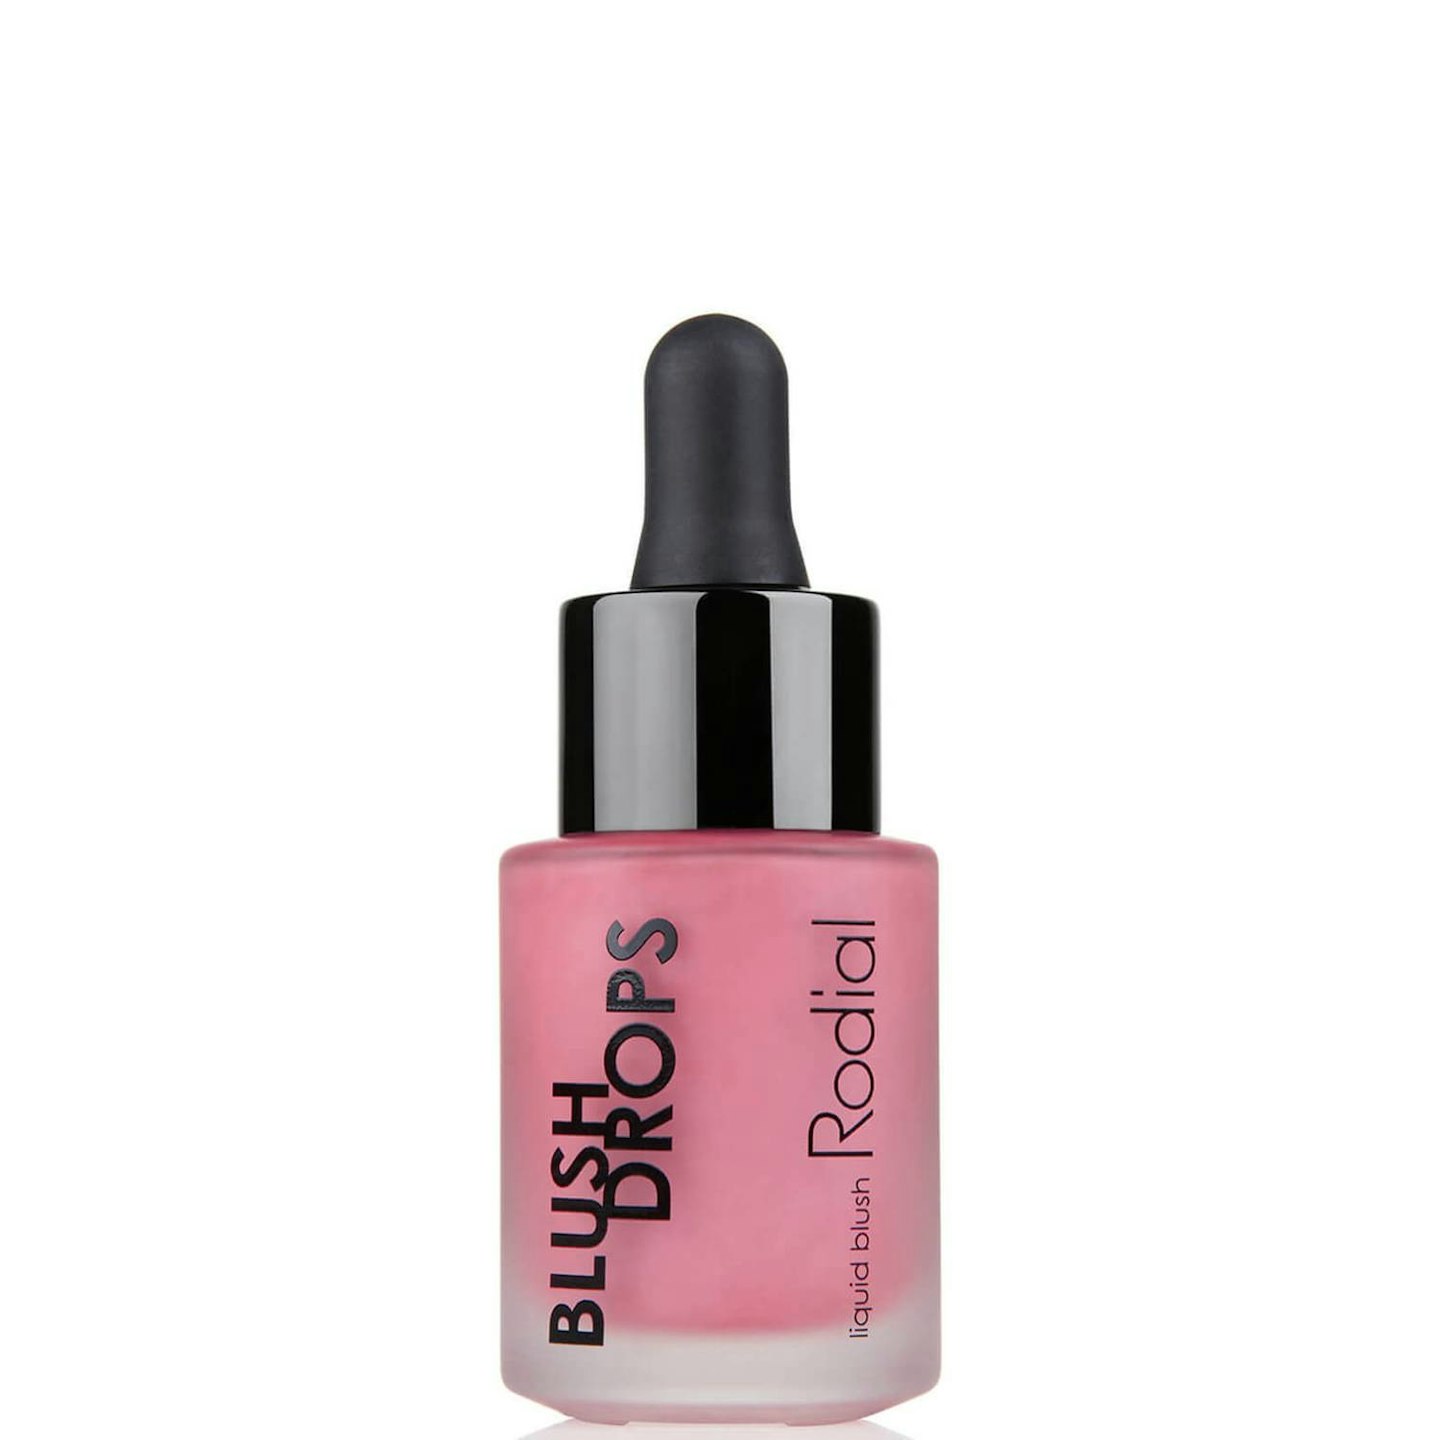 Rodial Frosted Pink Liquid Blush